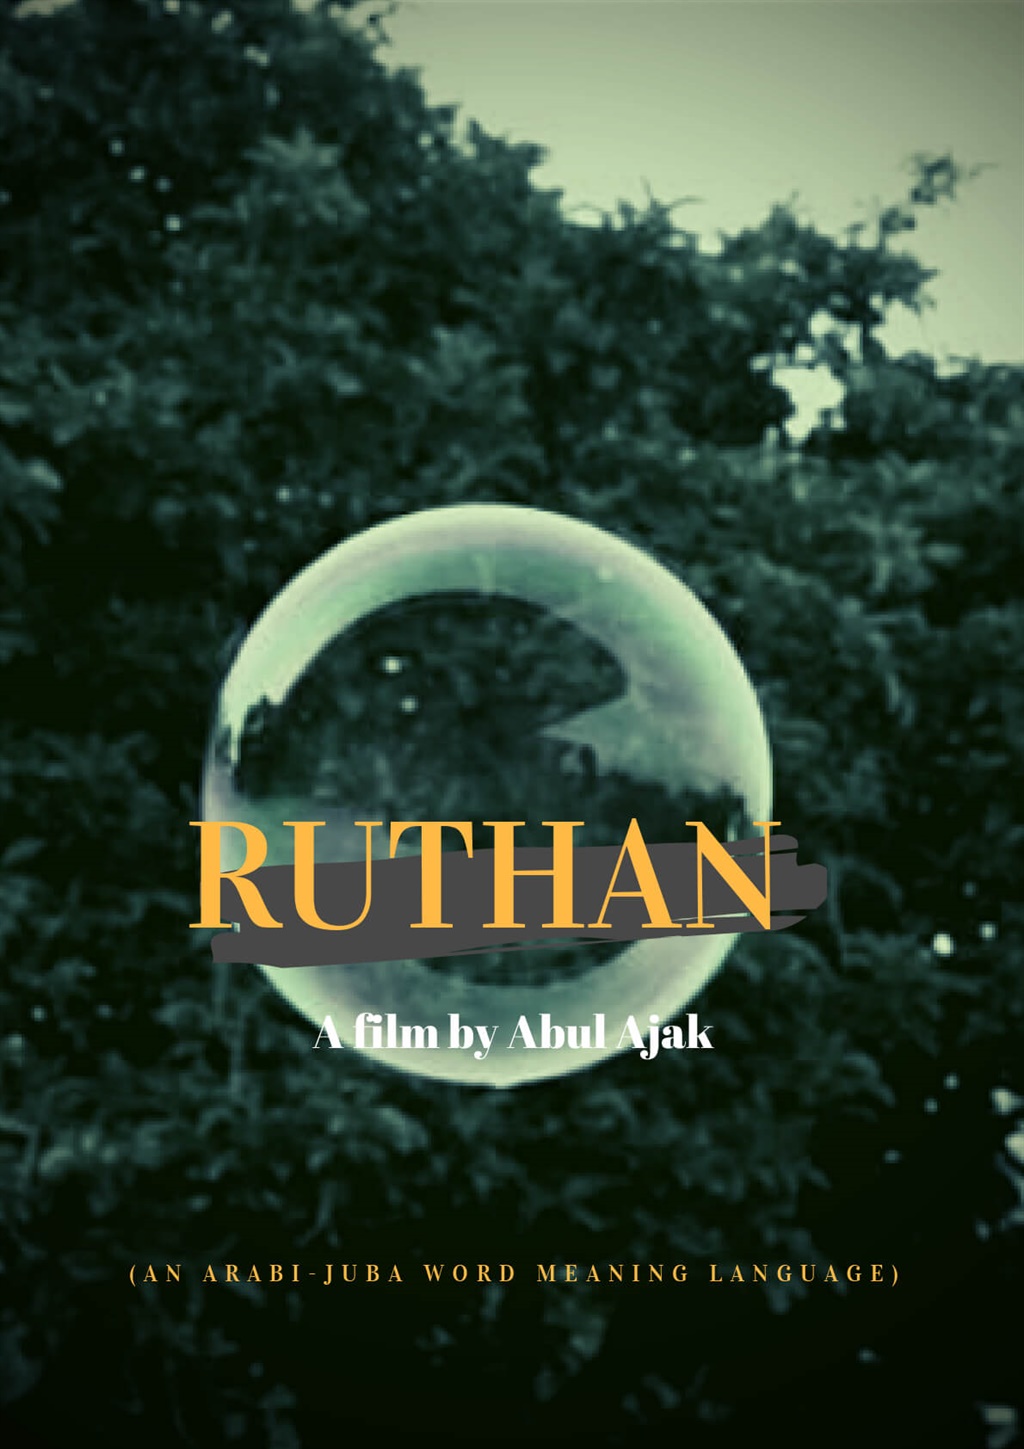 Ruthan directed by Abul Ajak